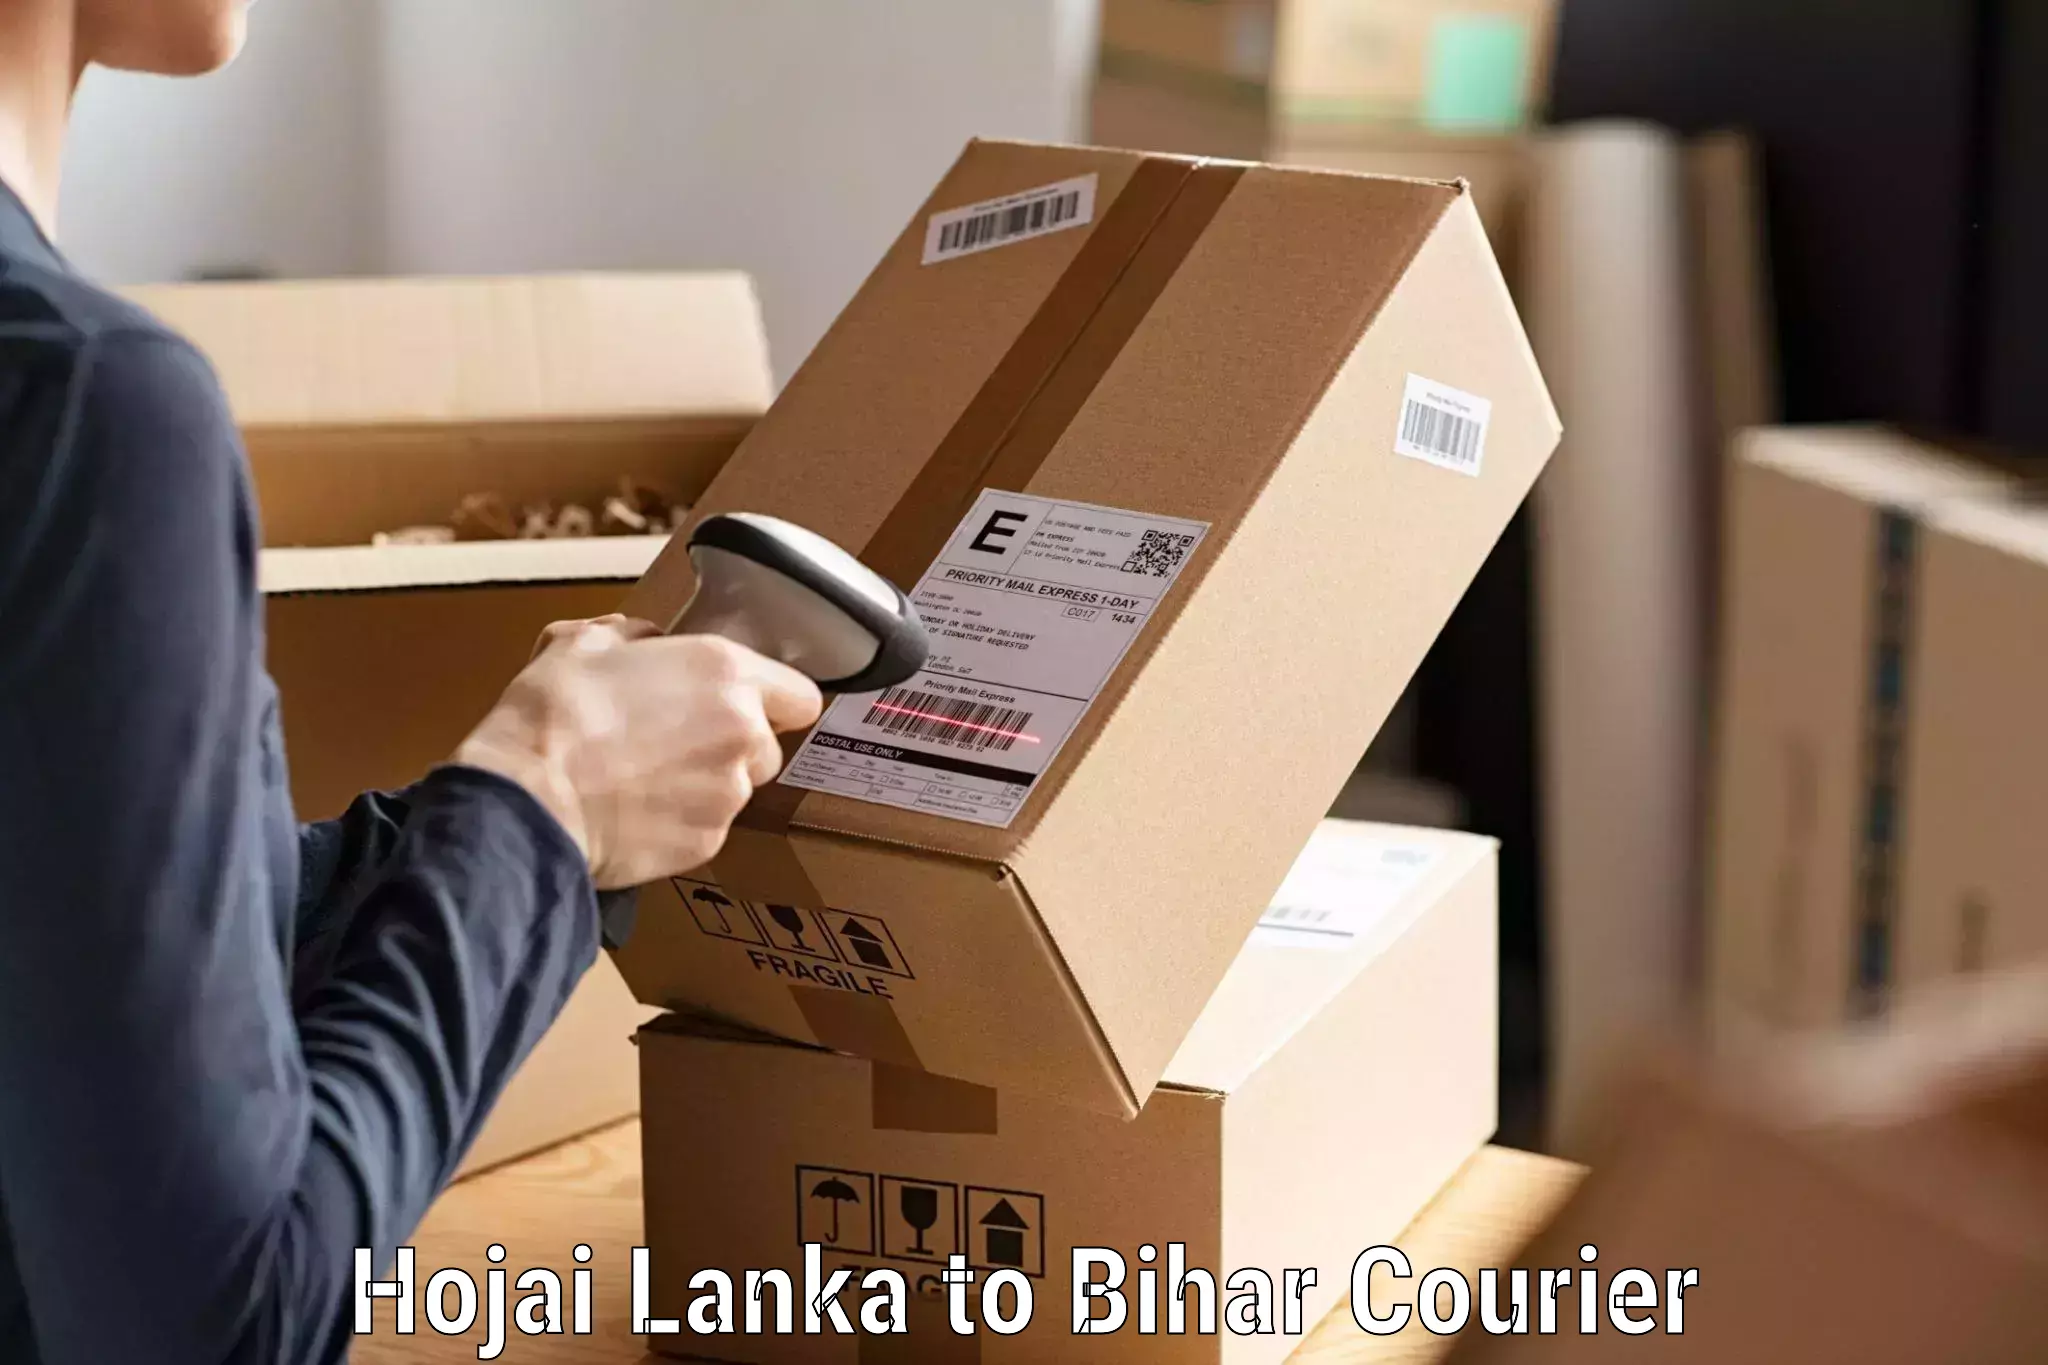 Advanced package delivery Hojai Lanka to Rajpur